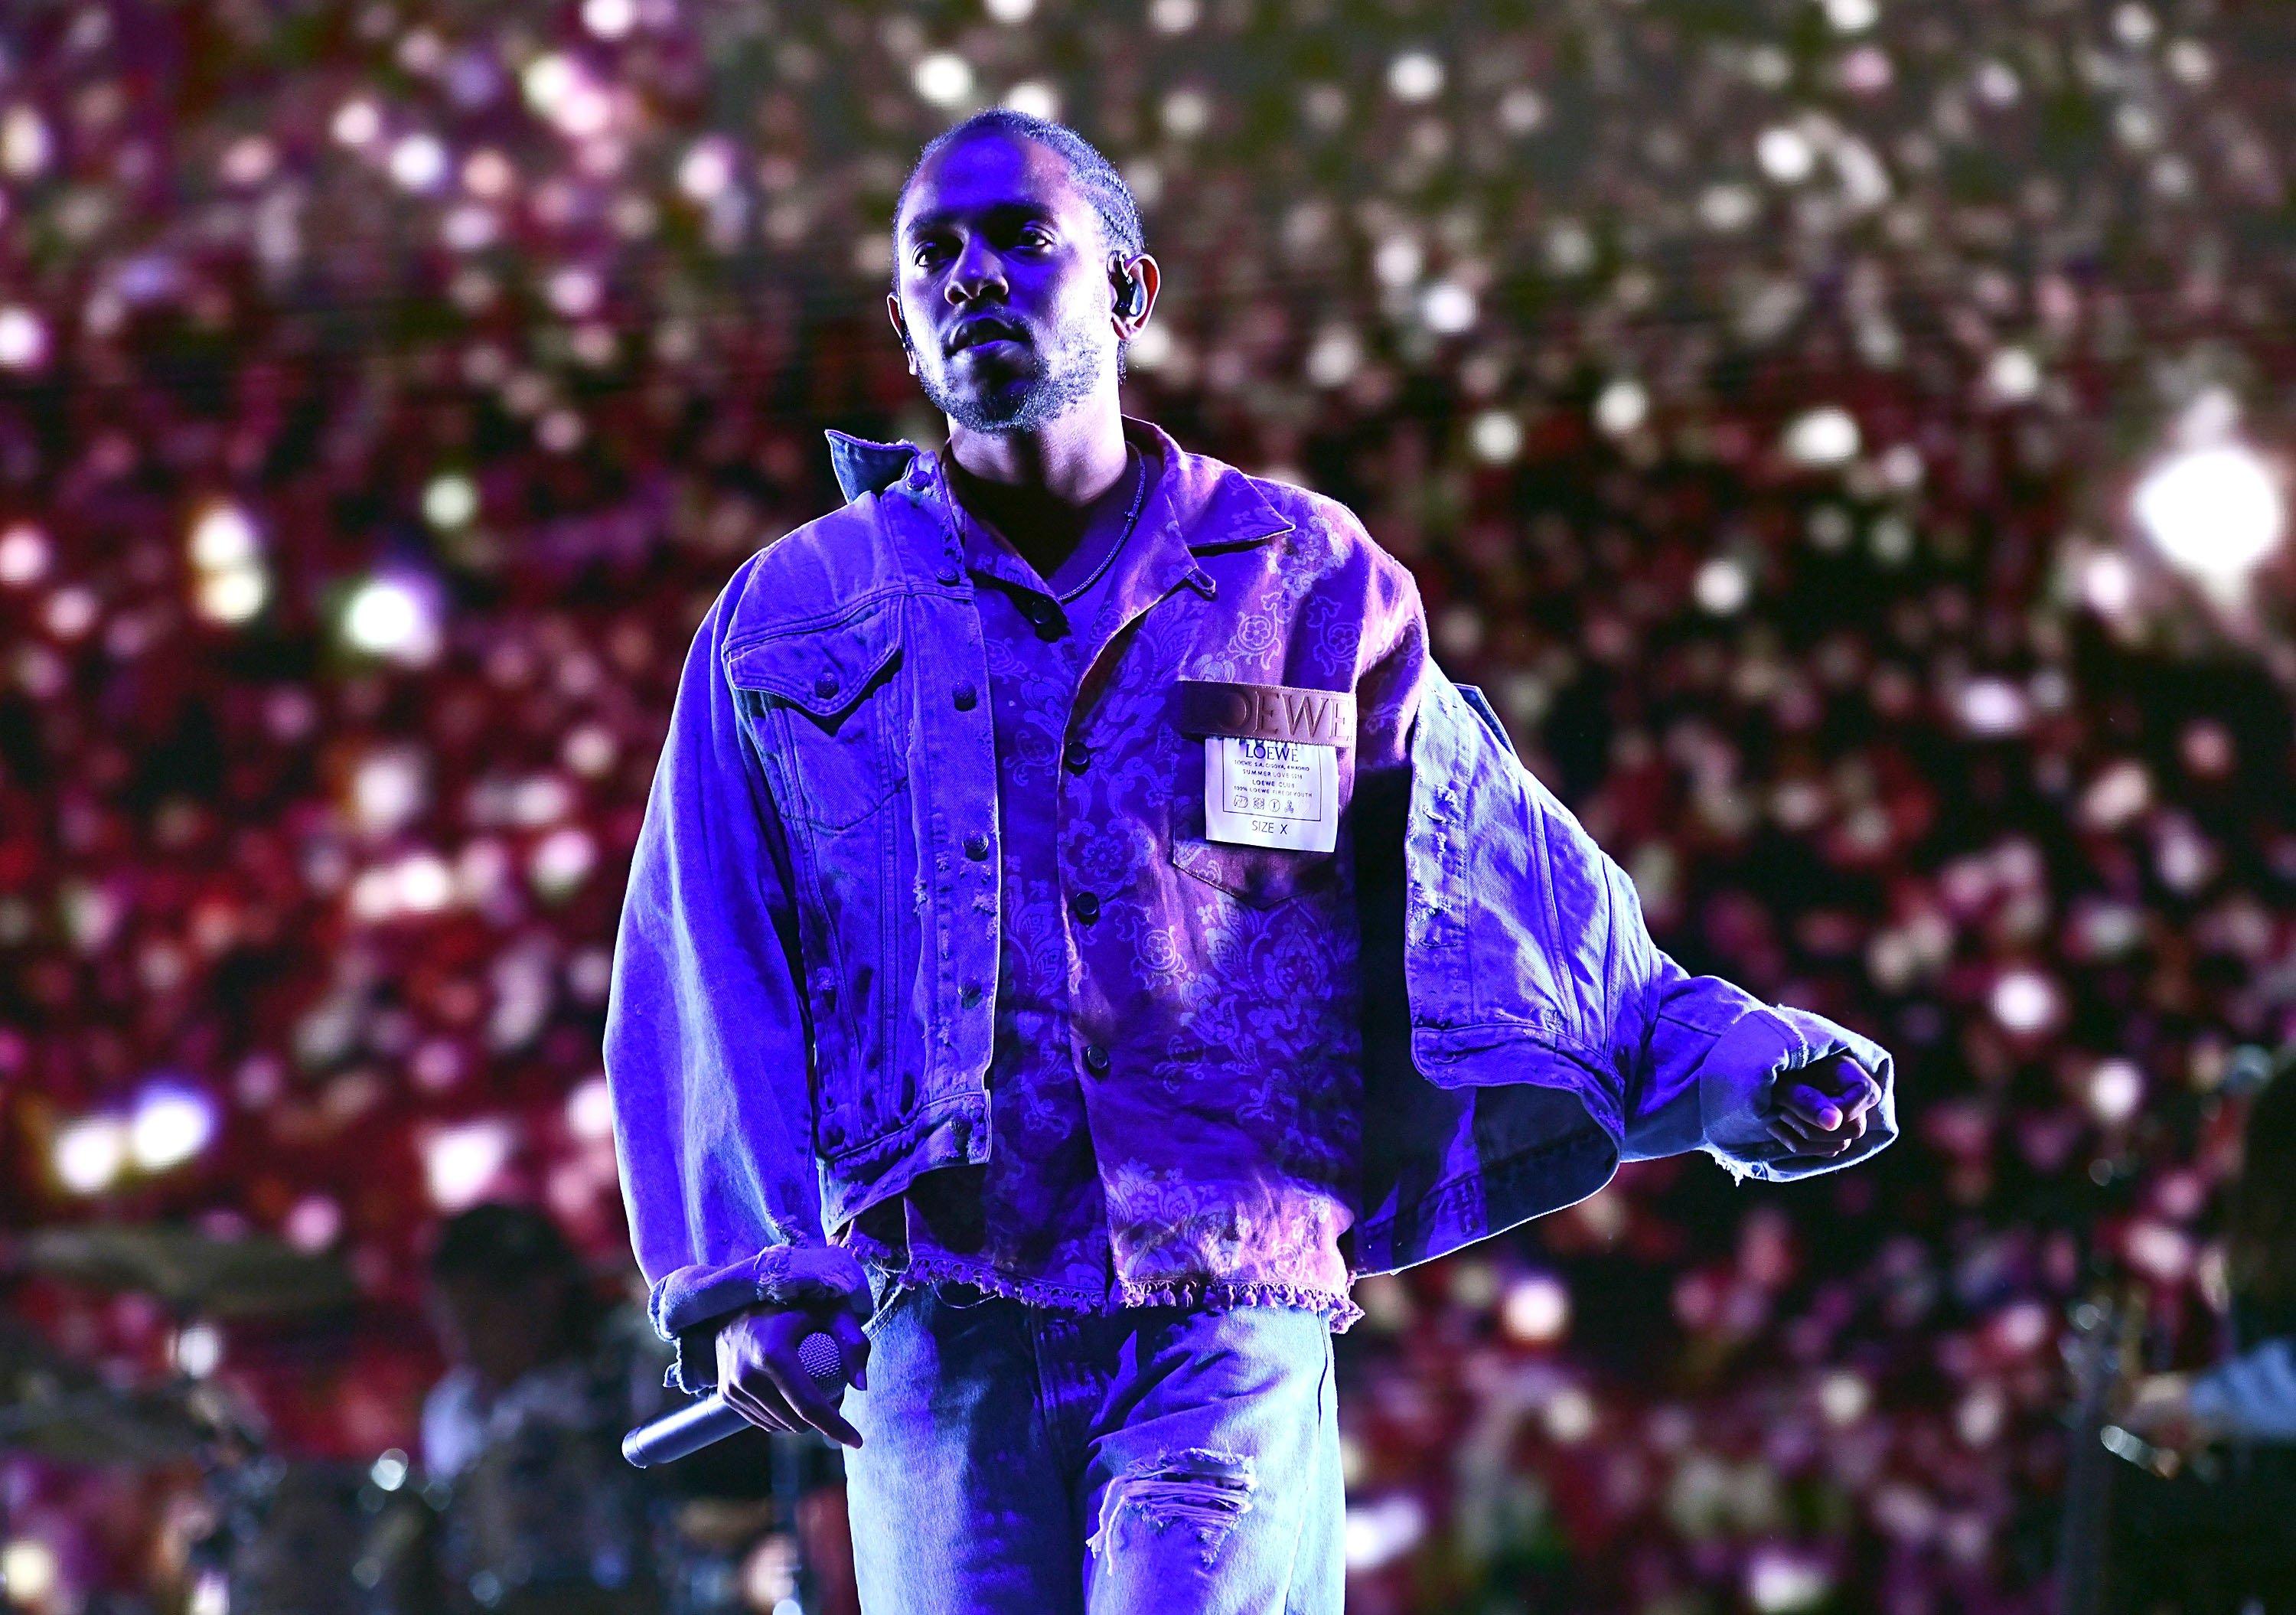 Kendrick Lamar performs the 2018 Coachella Valley Music and Arts Festival on April 13, 2018, in Indio, California